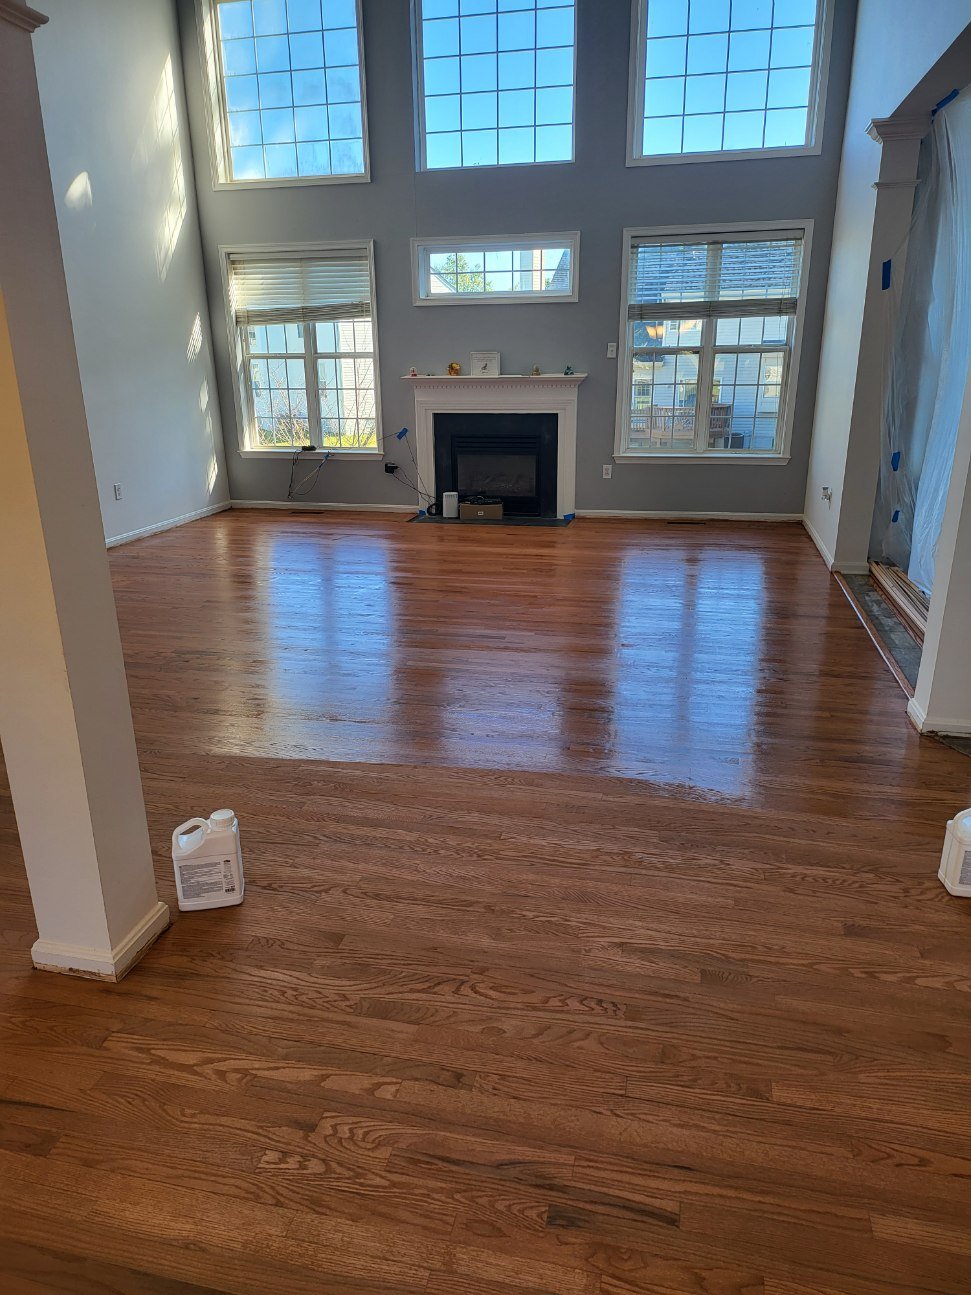 Hardwood Flooring in Large Space with Windows by MM Flooring in Crofton, MD